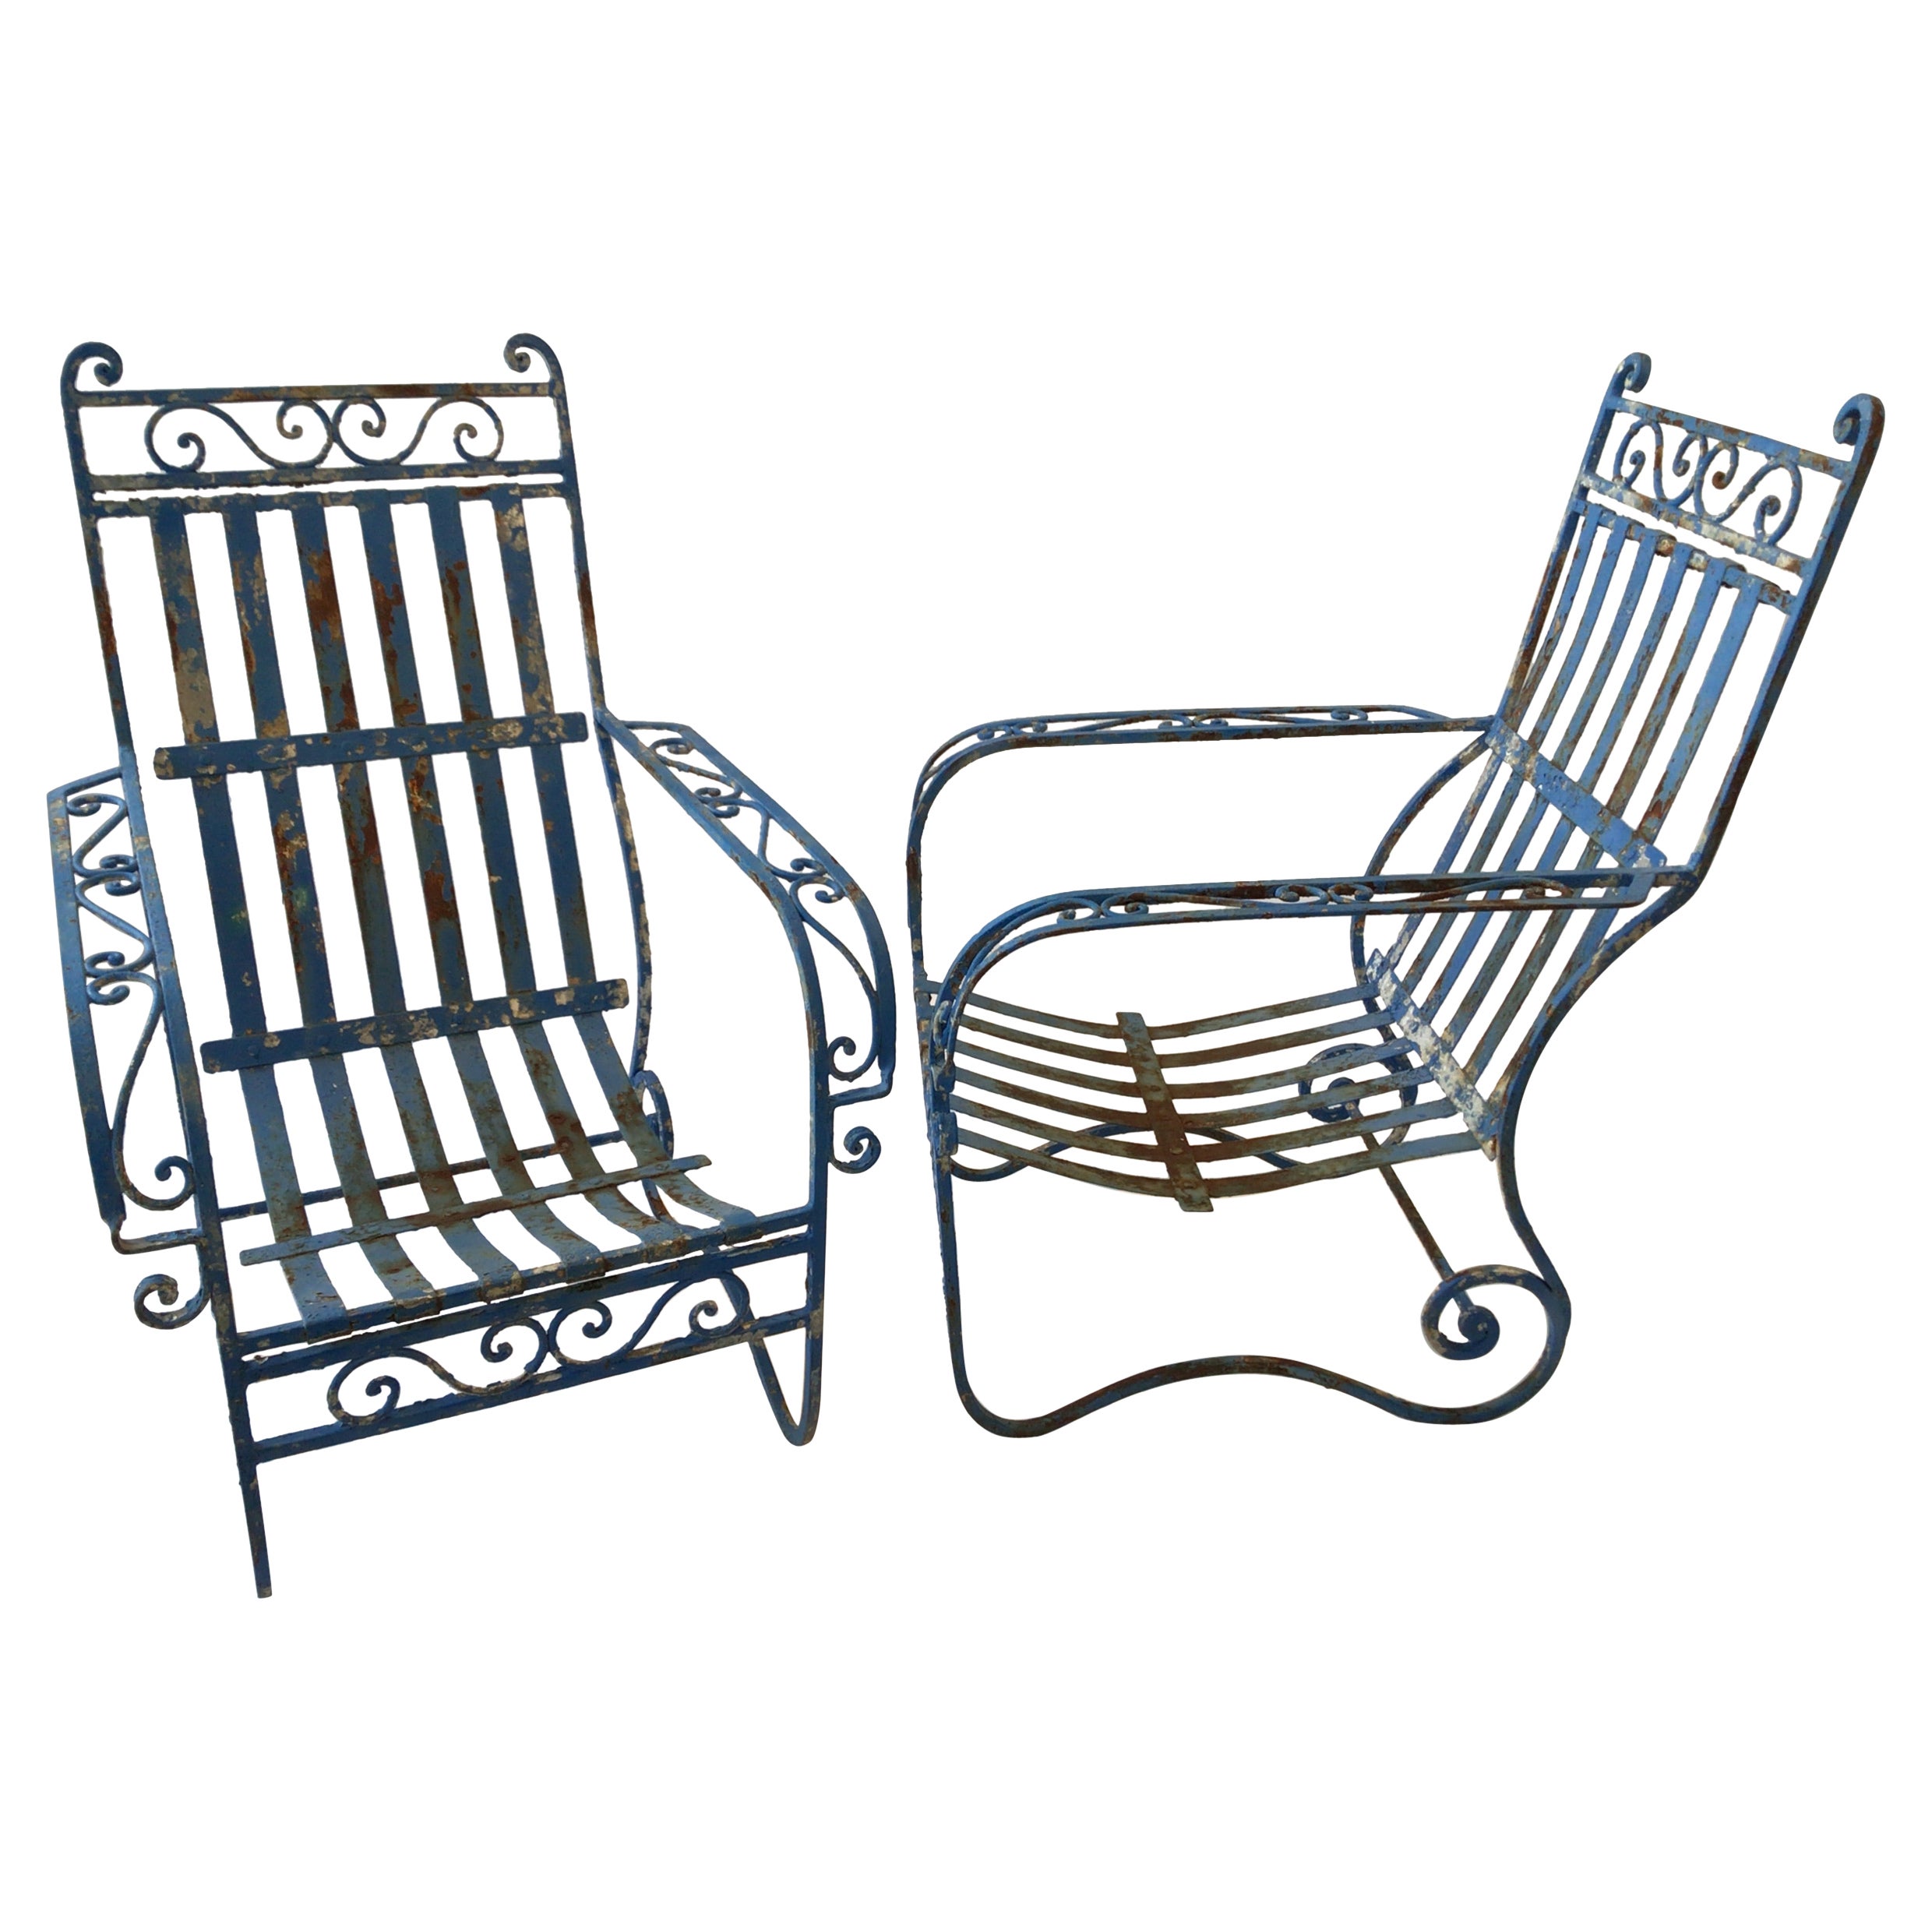 Pair Of 1940s French Outdoor Iron Armchairs